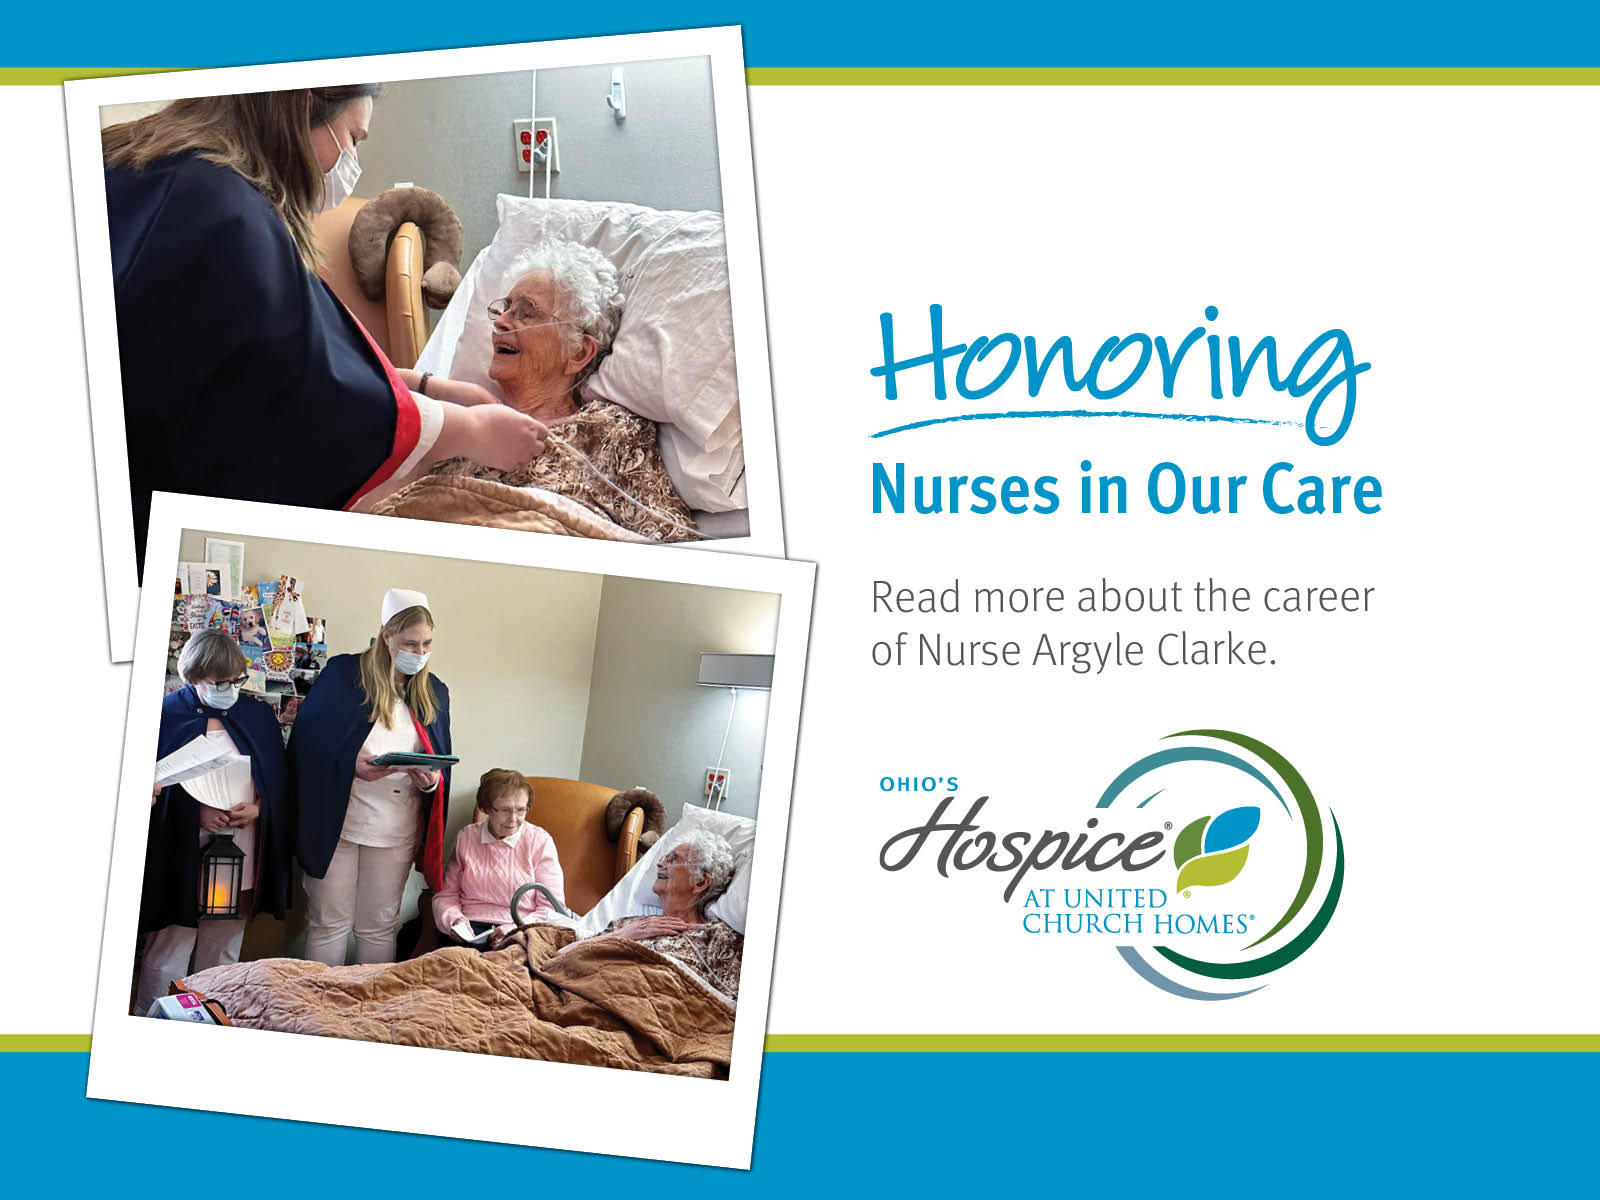 Honoring Nurses in Our Care. Read more about the career of Nurse Argyle Clarke. Ohio's Hospice at United Church Homes